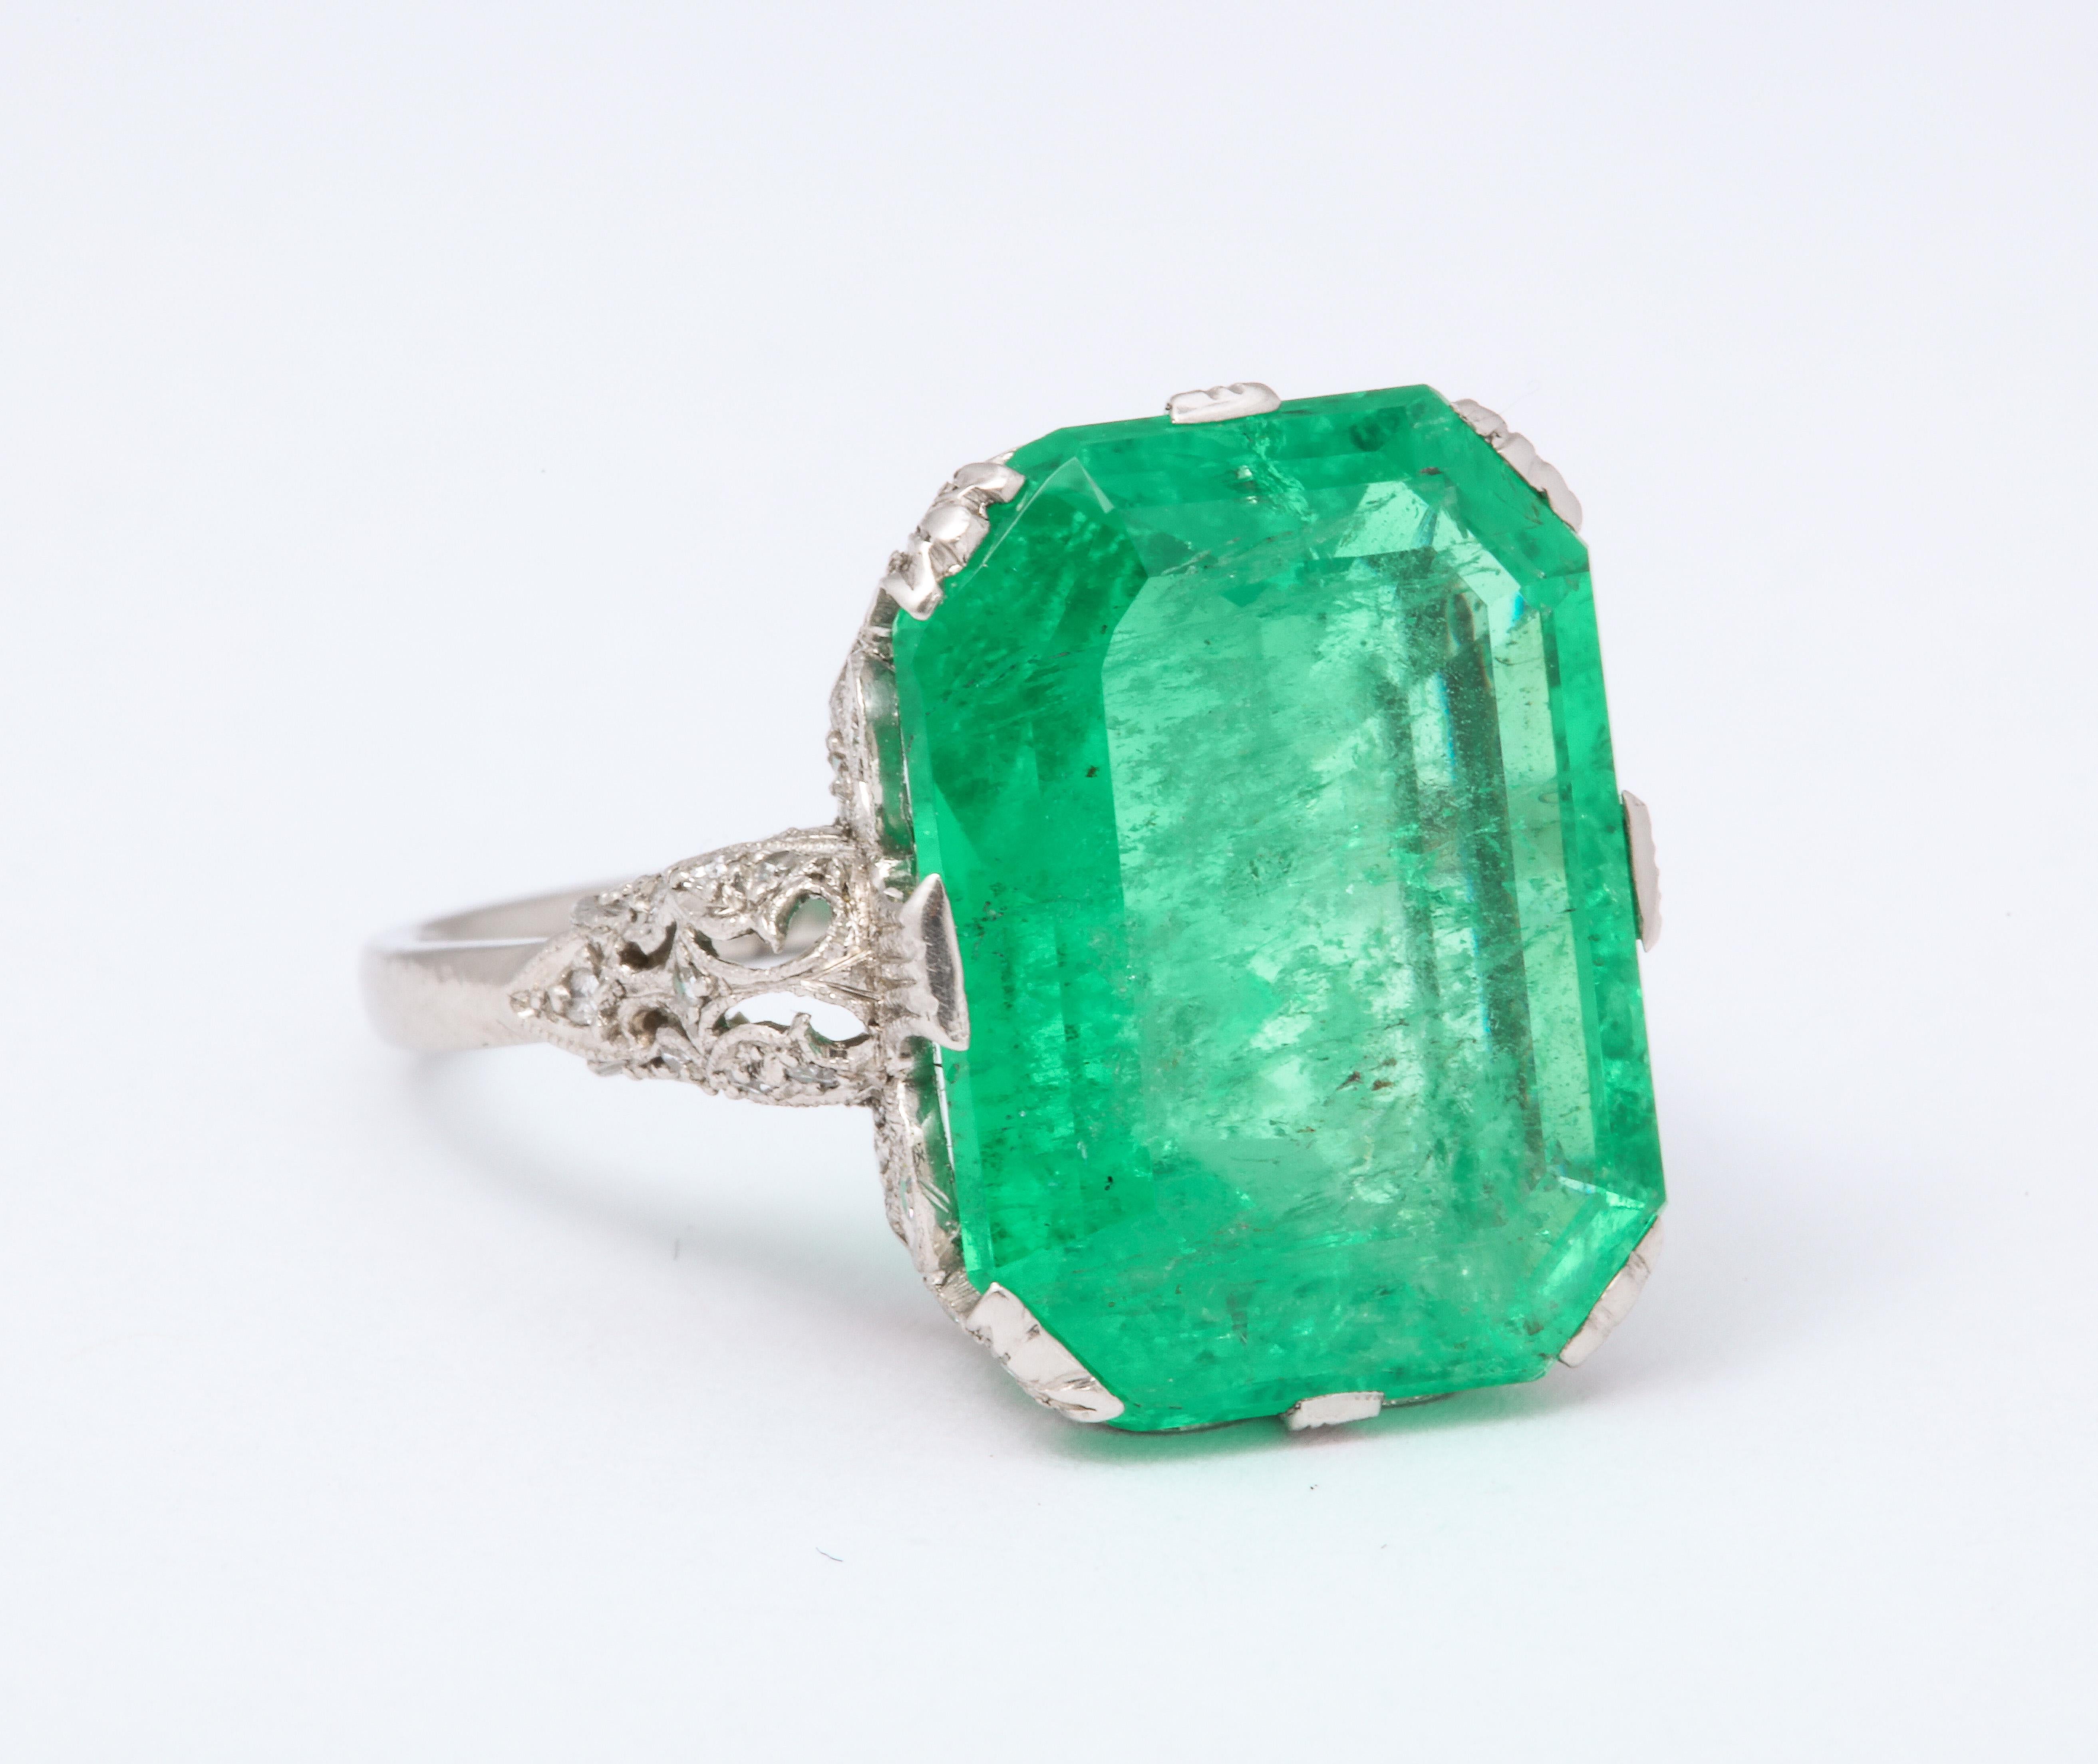 Emerald cut Edwardian Emerald Ring. Platinum unmarked but tested. 6.7 grams. Emerald @ approximately 9.0 cts tw, 54 single cut fine white diamonds @ .30 cts tw. Incredible lace-like gallery was handmade. Circa 1900. Size 5 1/4.